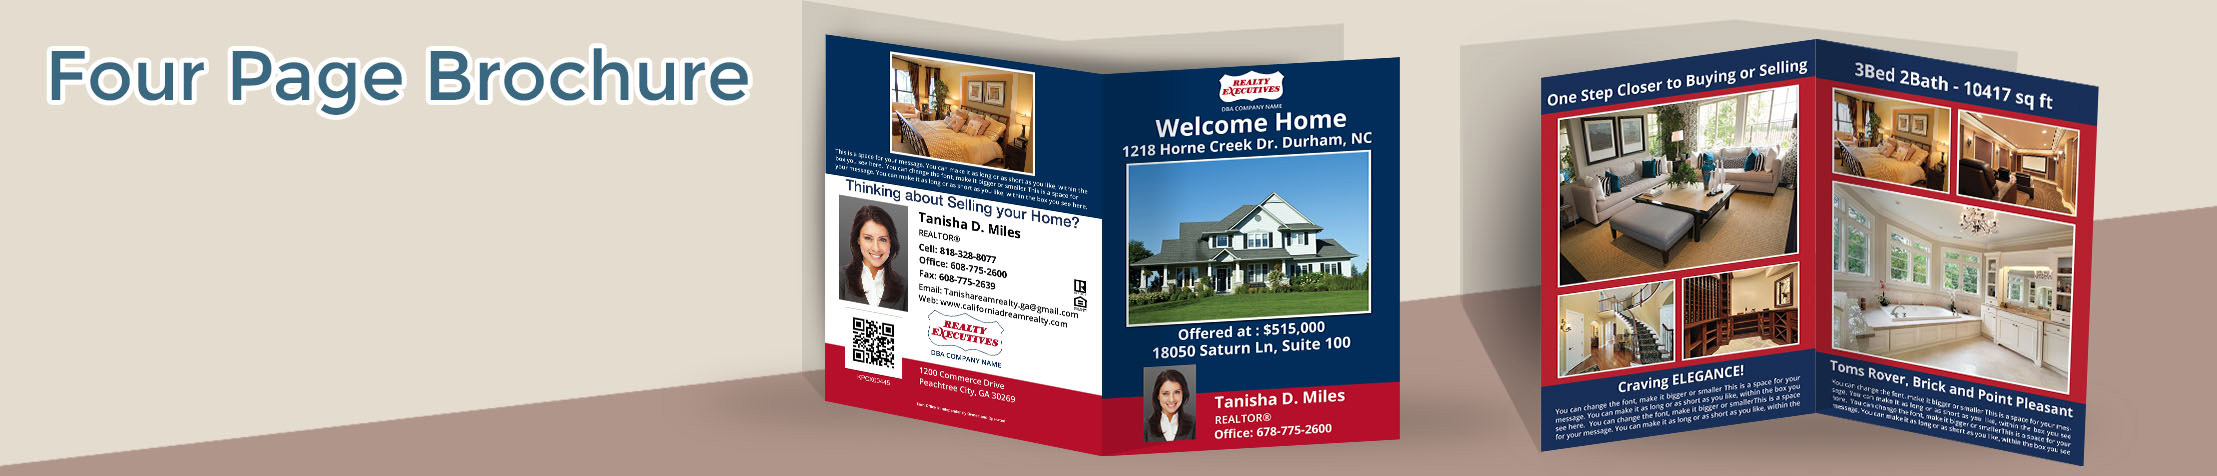 Realty Executives Real Estate Flyers and Brochures - Realty Executives  four page brochure templates for open houses and marketing | BestPrintBuy.com